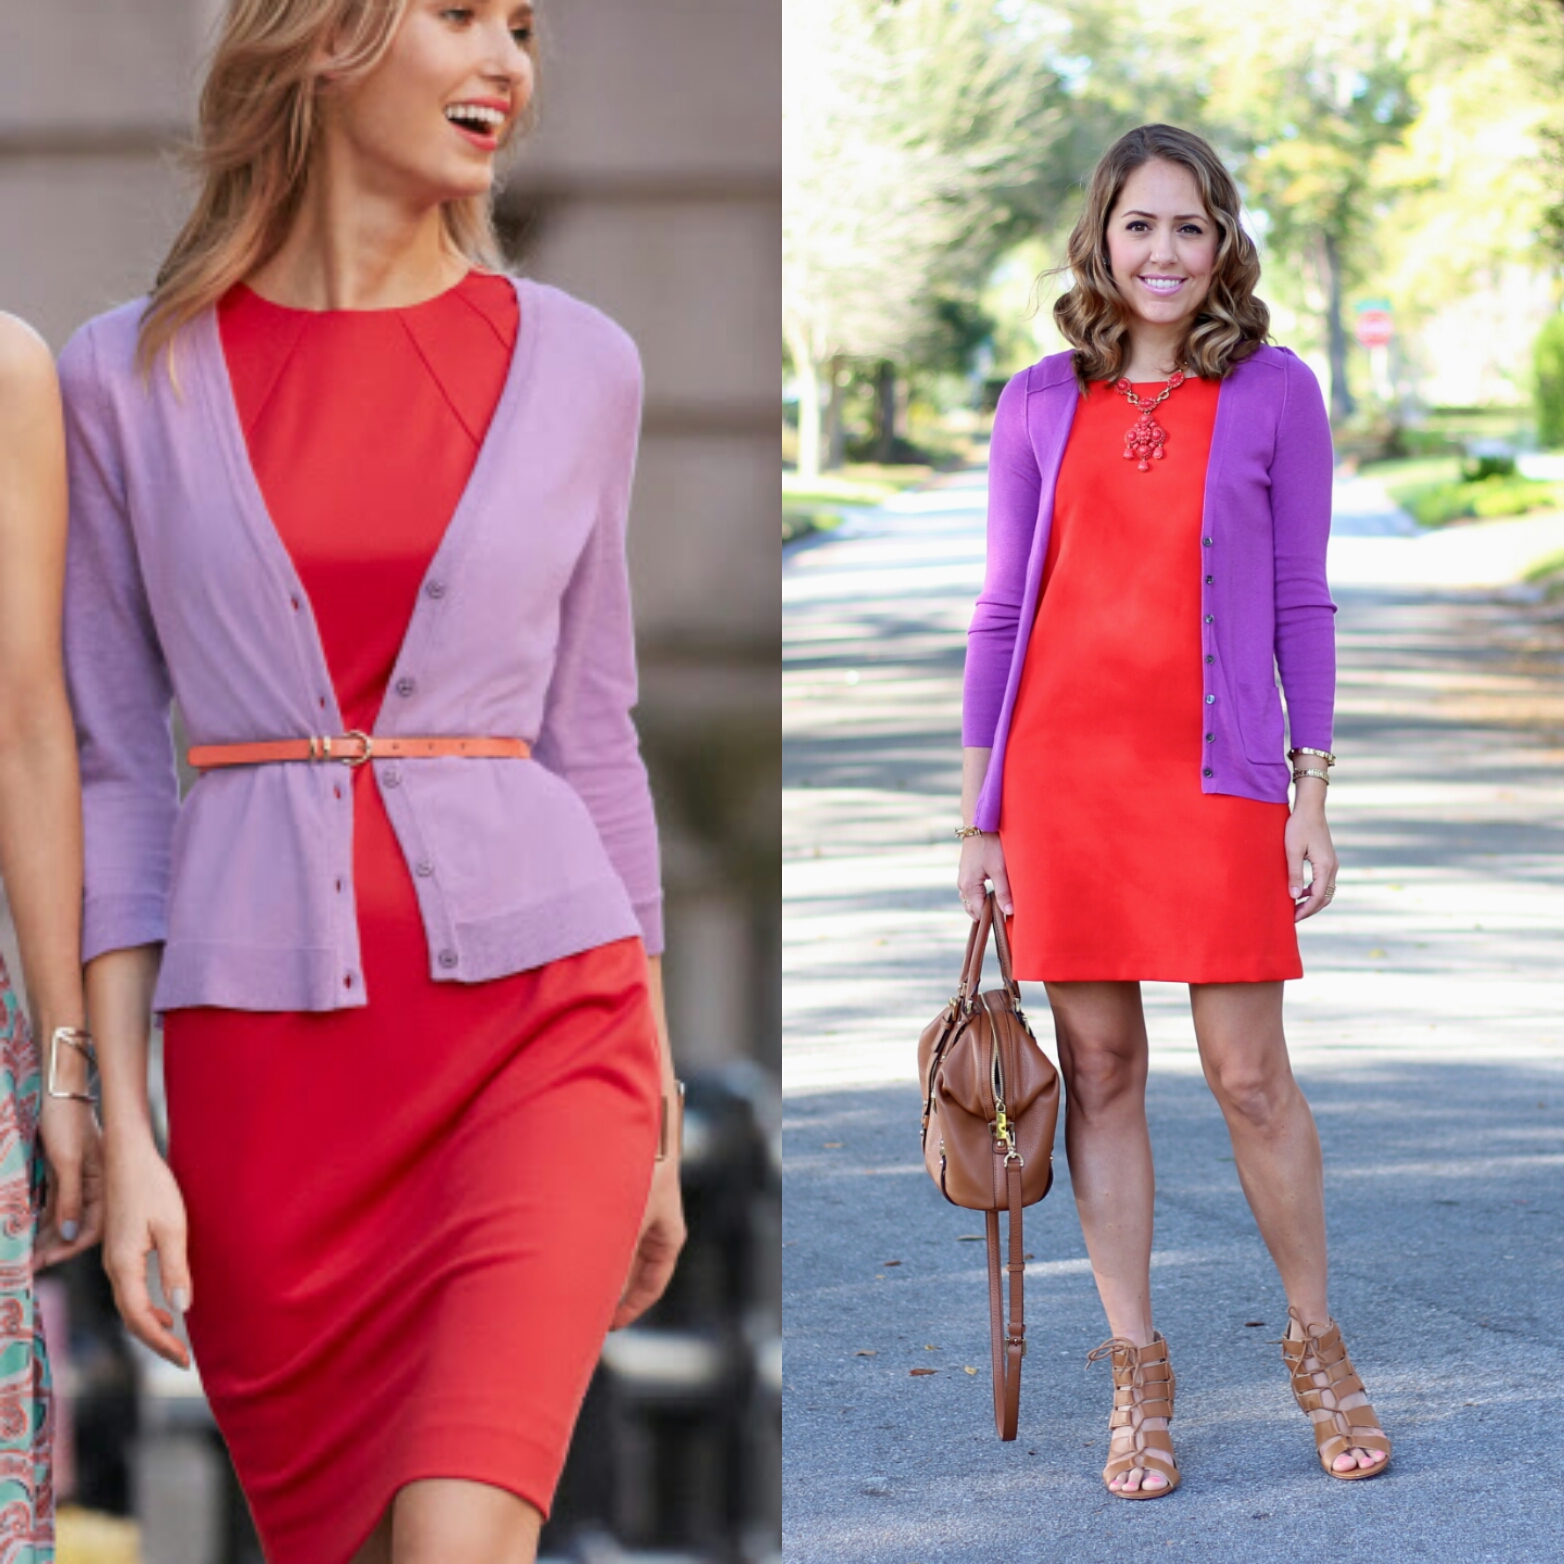 Today's Everyday Fashion: Purple and Red — J's Everyday Fashion